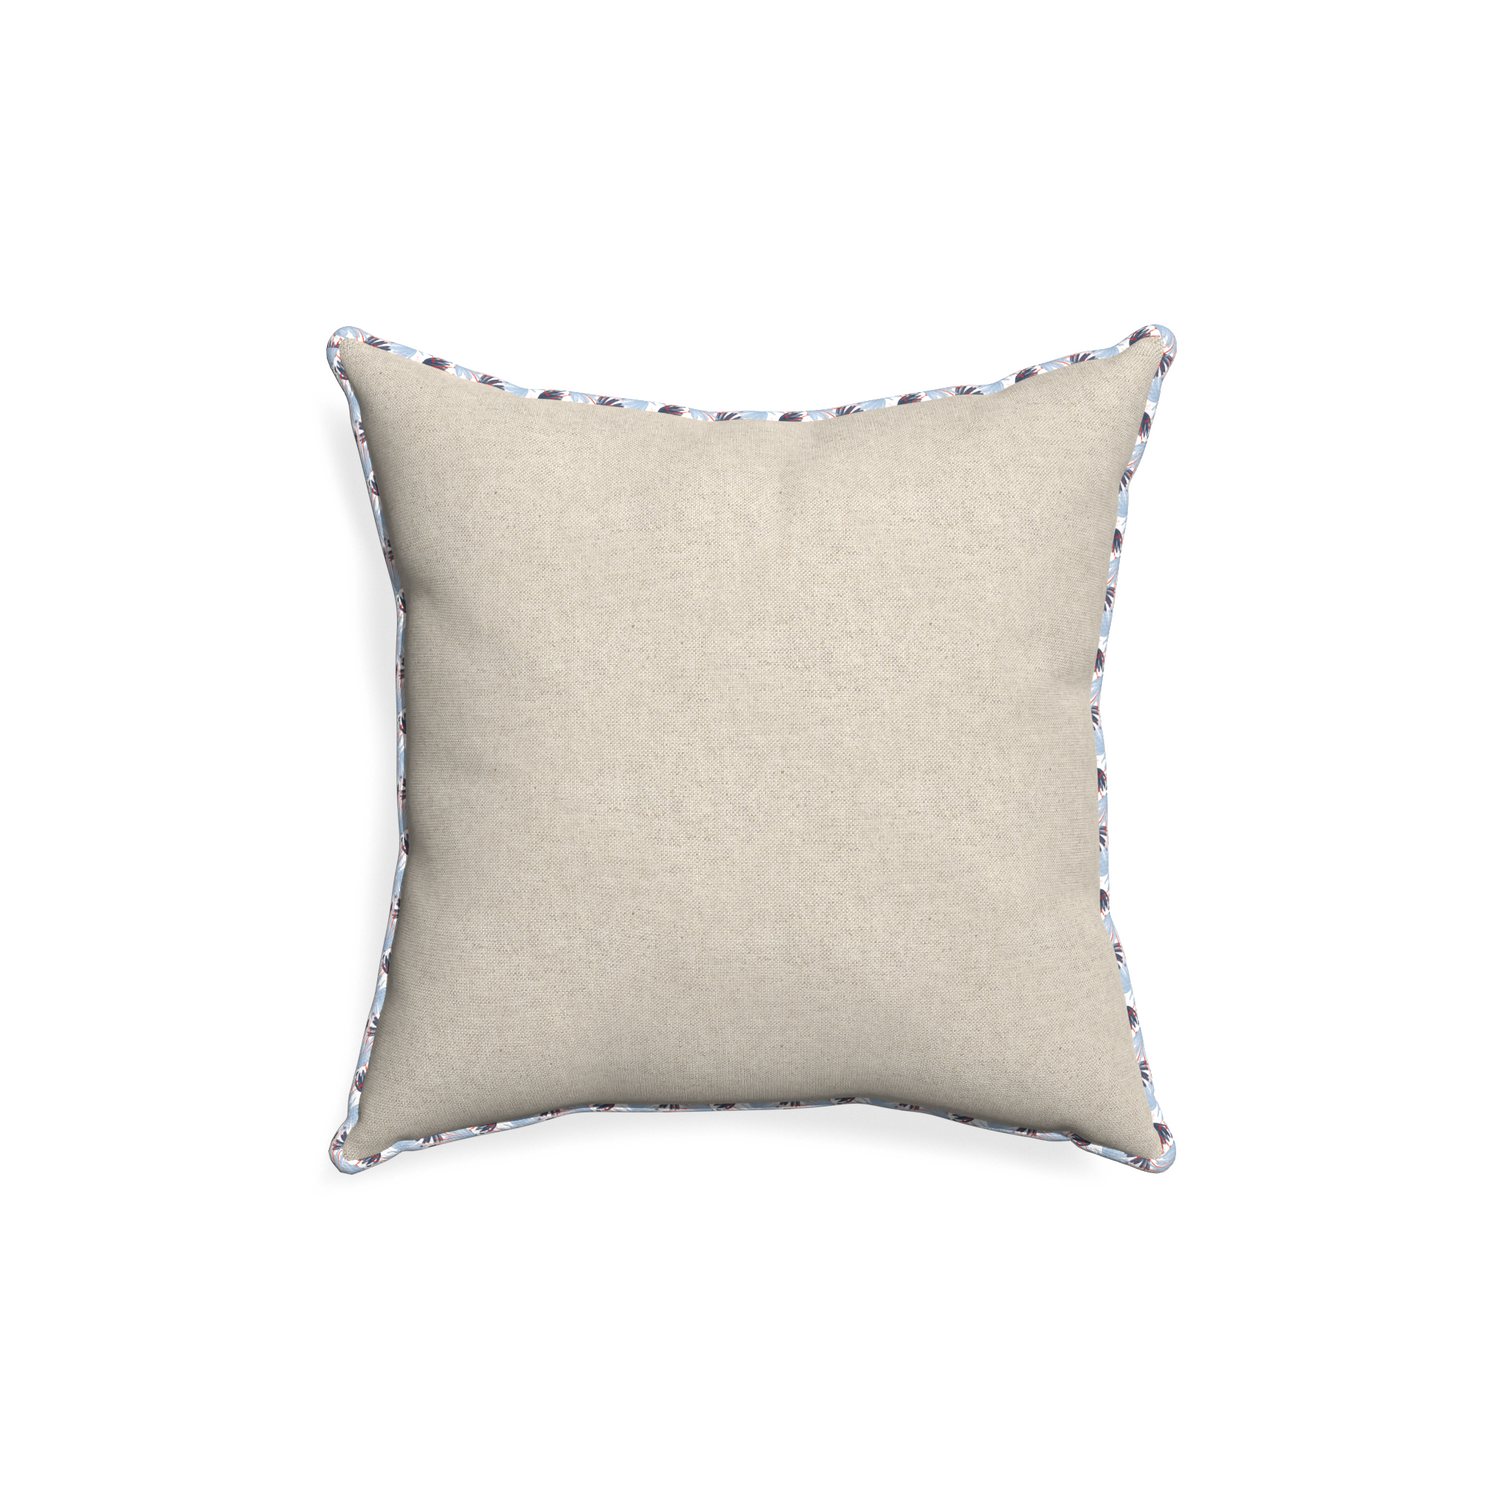 18-square oat custom light brownpillow with e piping on white background